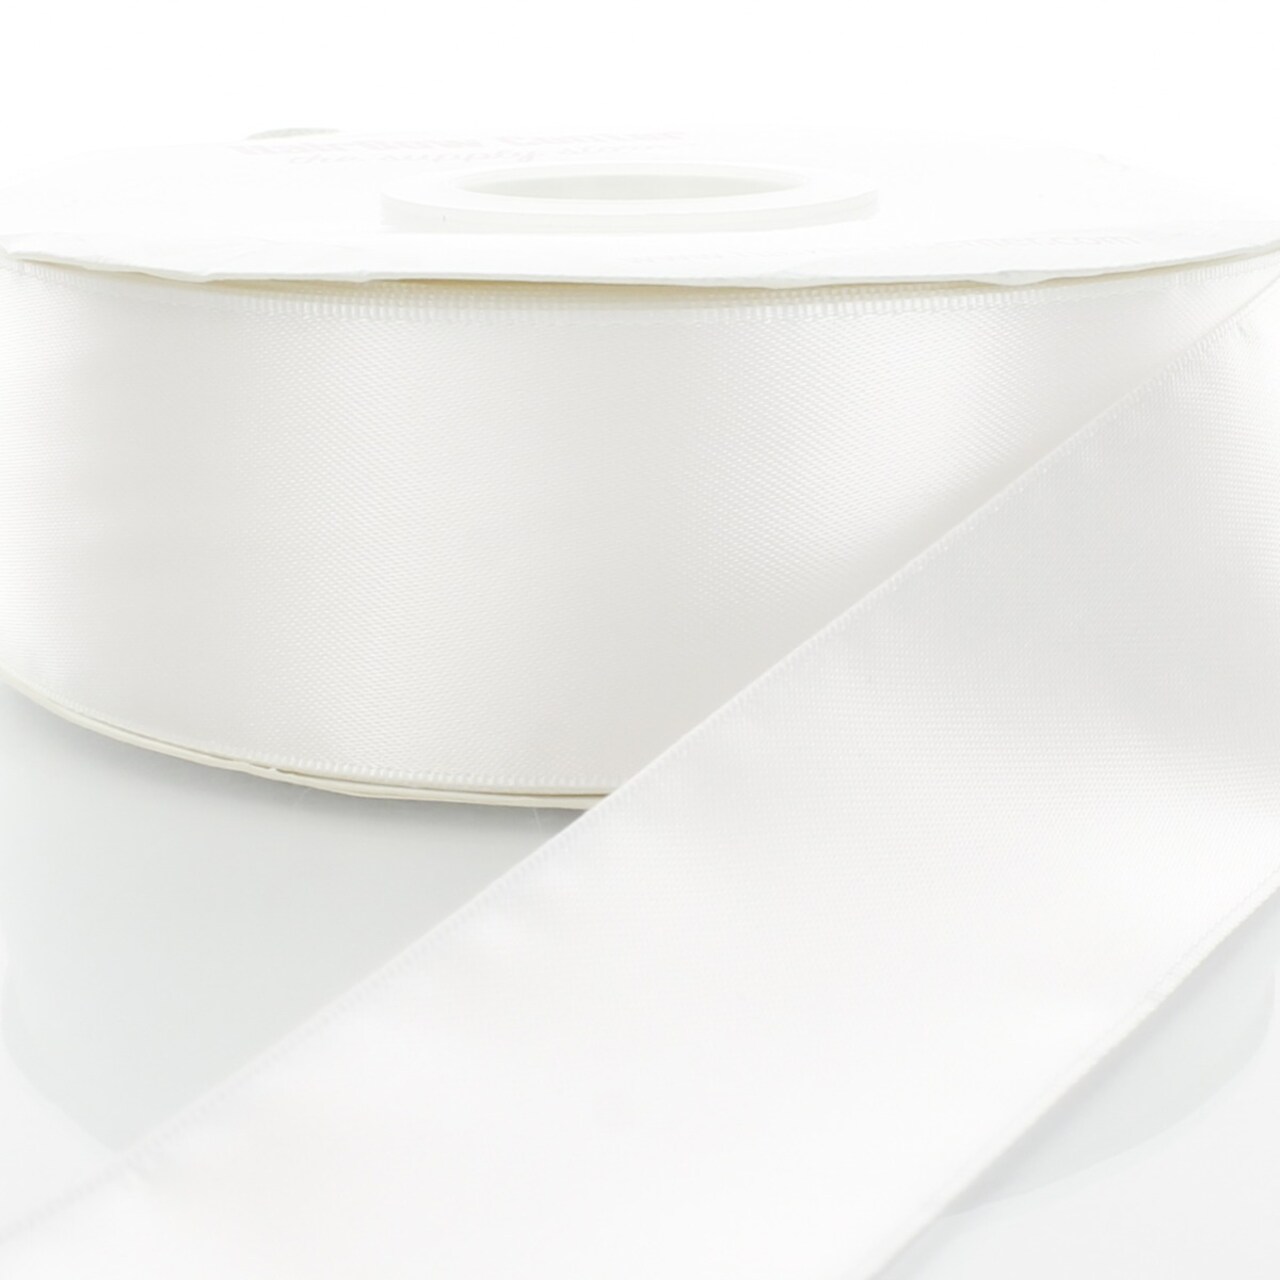 4 Double Faced Satin Ribbon 029 White 3yd